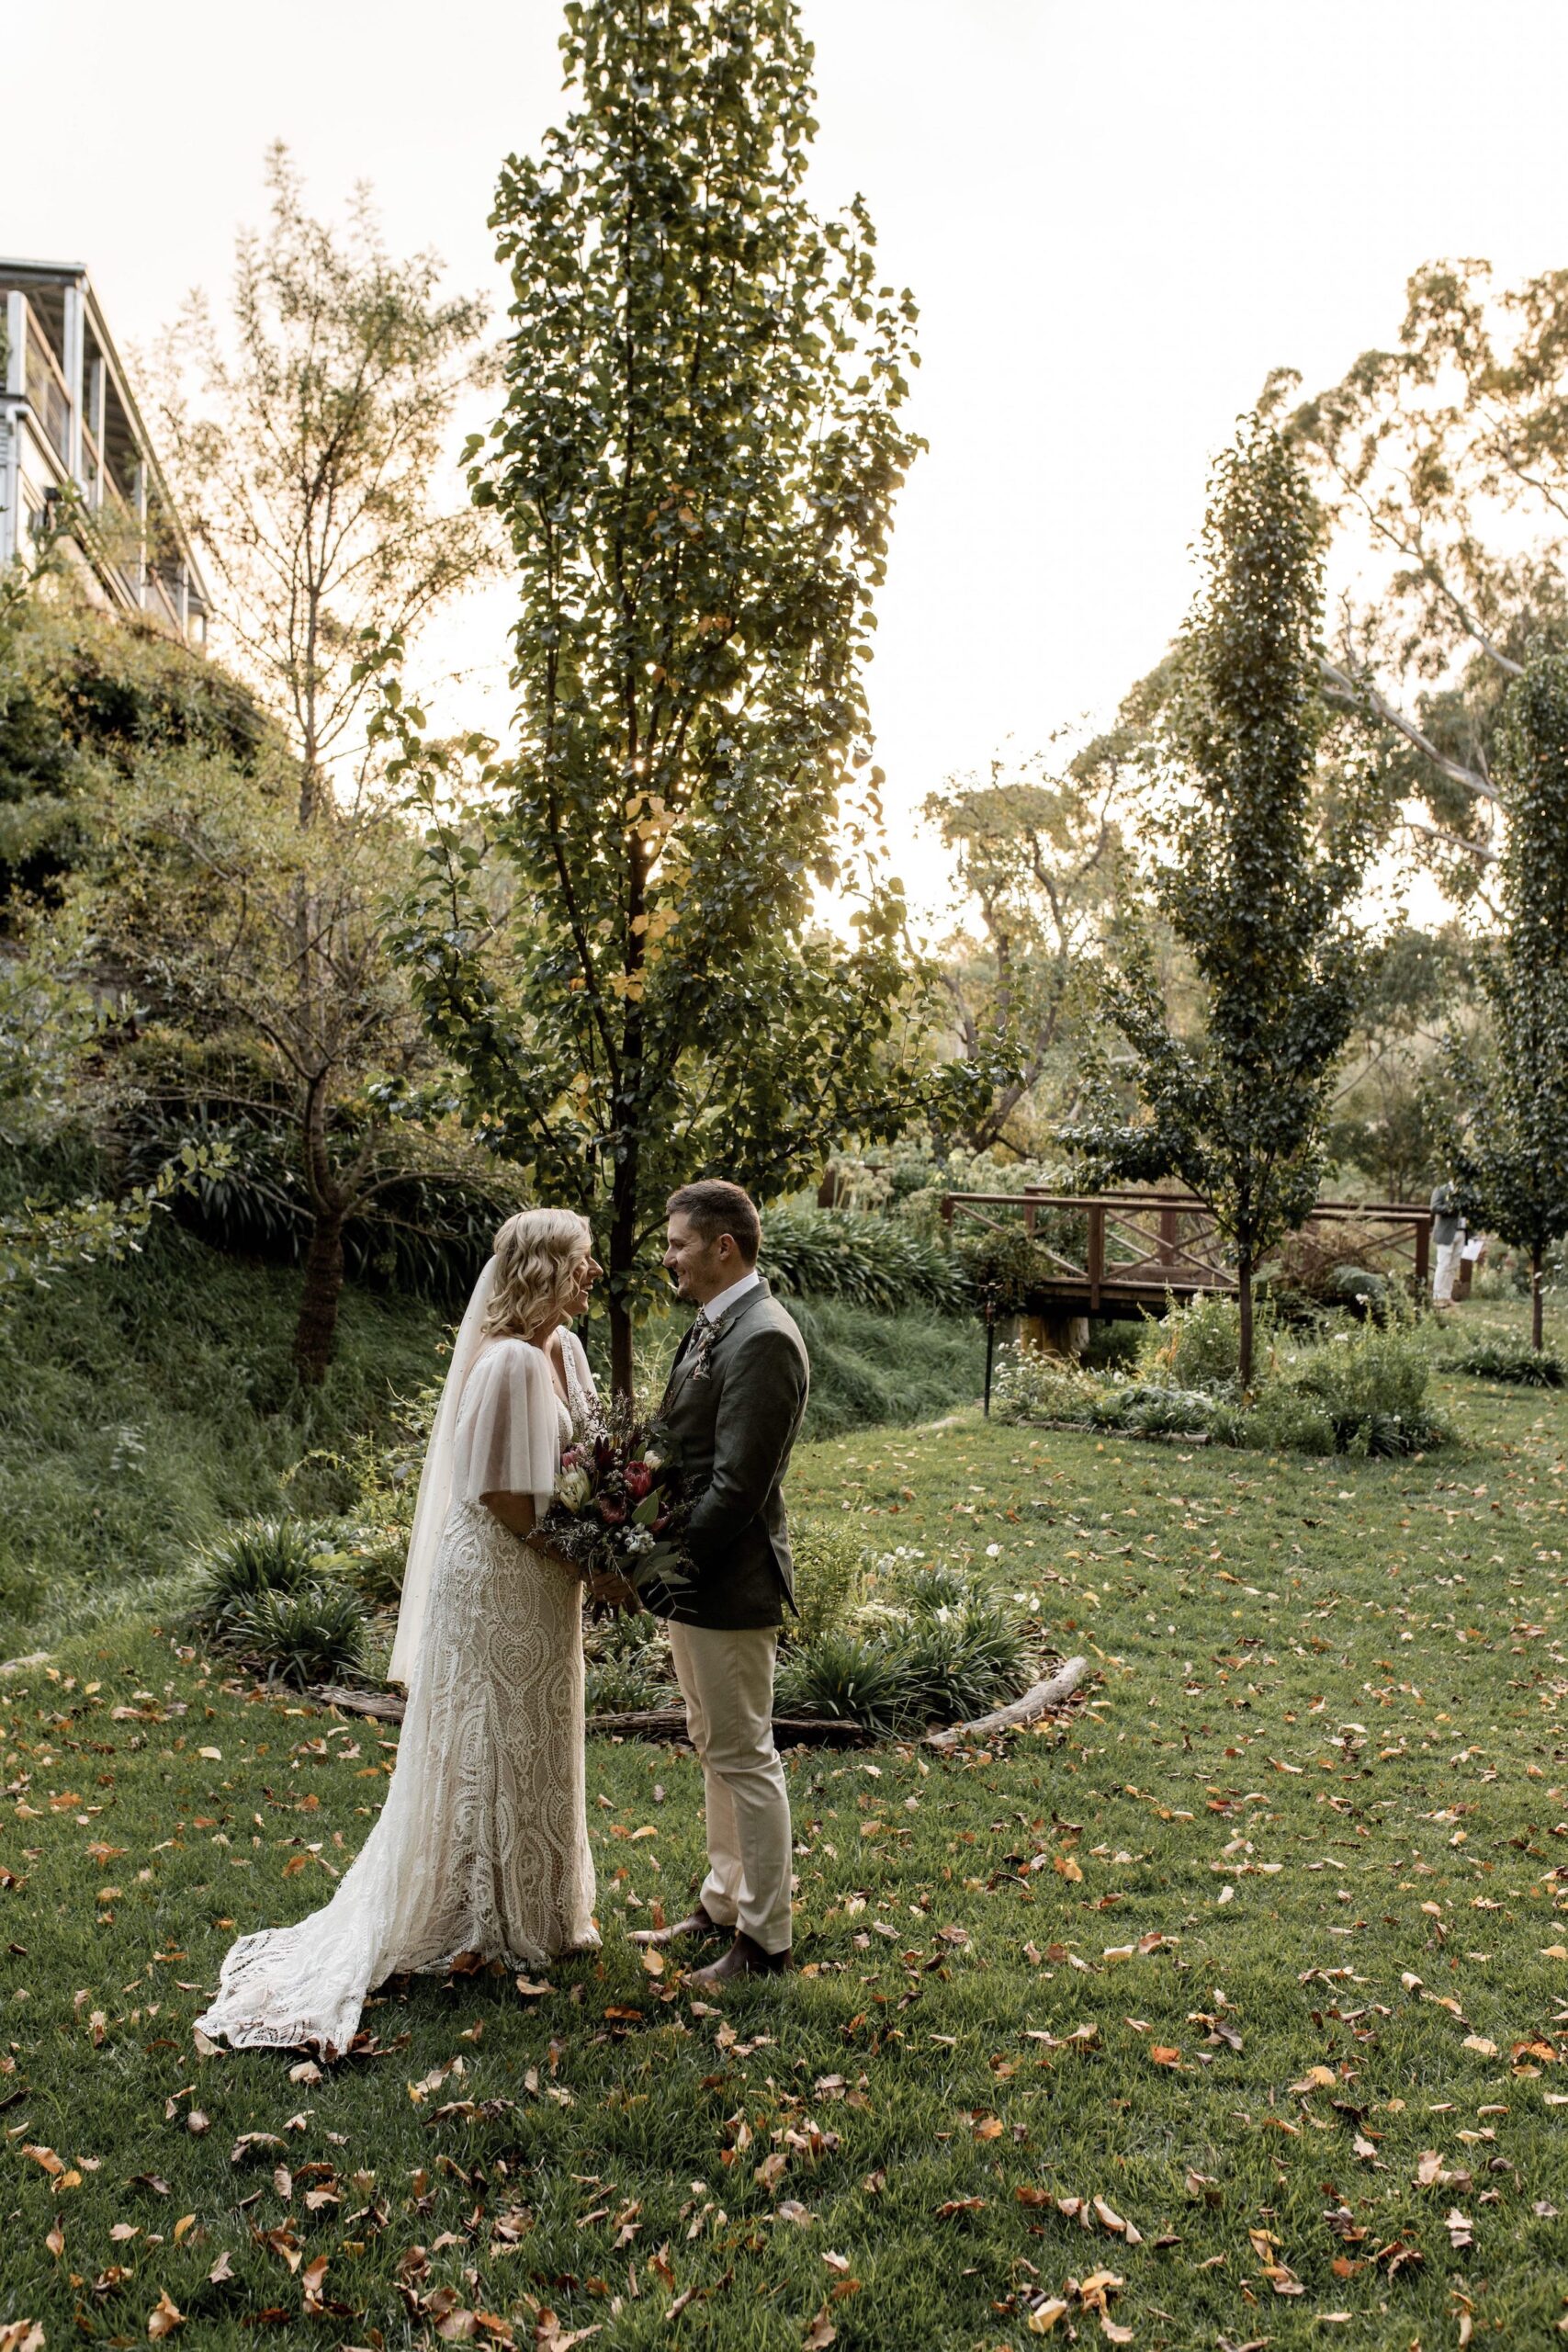 Inglewood Inn, Adelaide Hills Wedding Venue, modern space with rustic aspects but an elegant feel only a short drive from the Adelaide City.